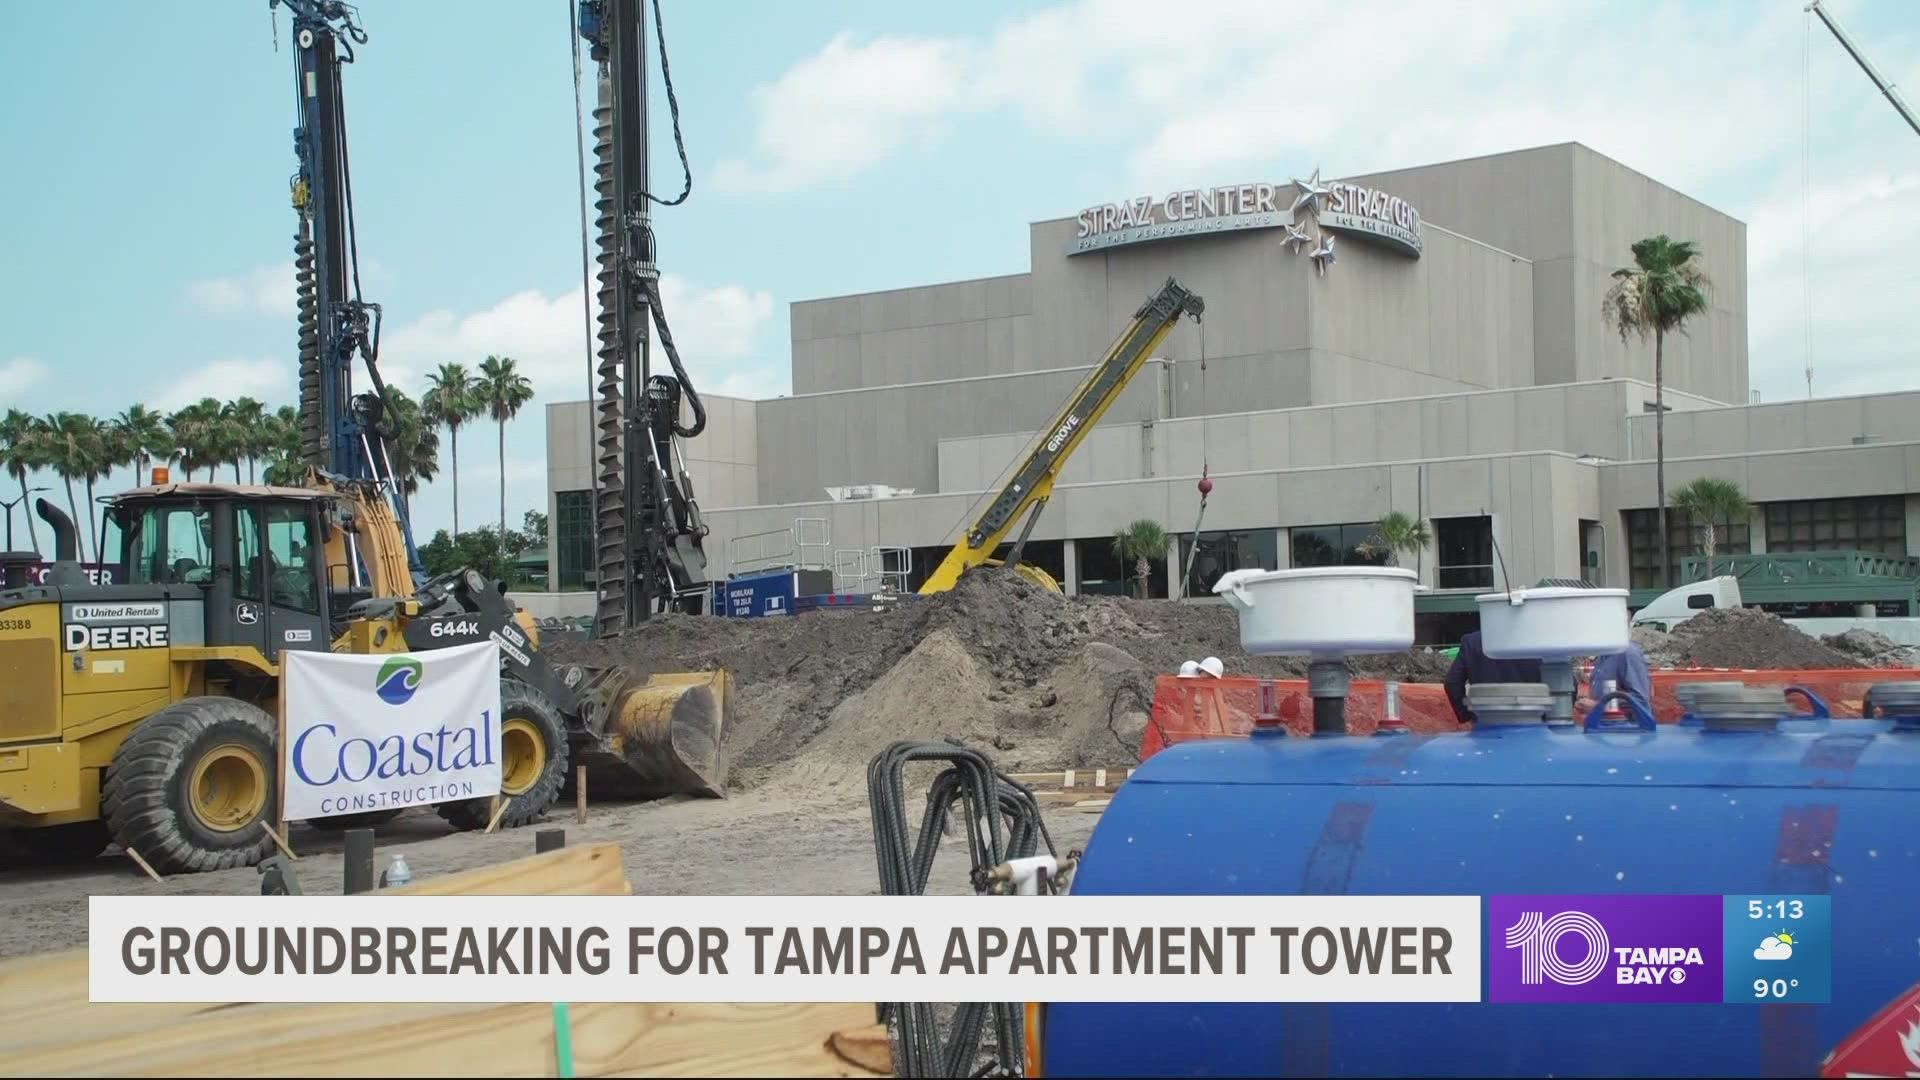 The new apartment tower will be based in the heart of Downtown Tampa.